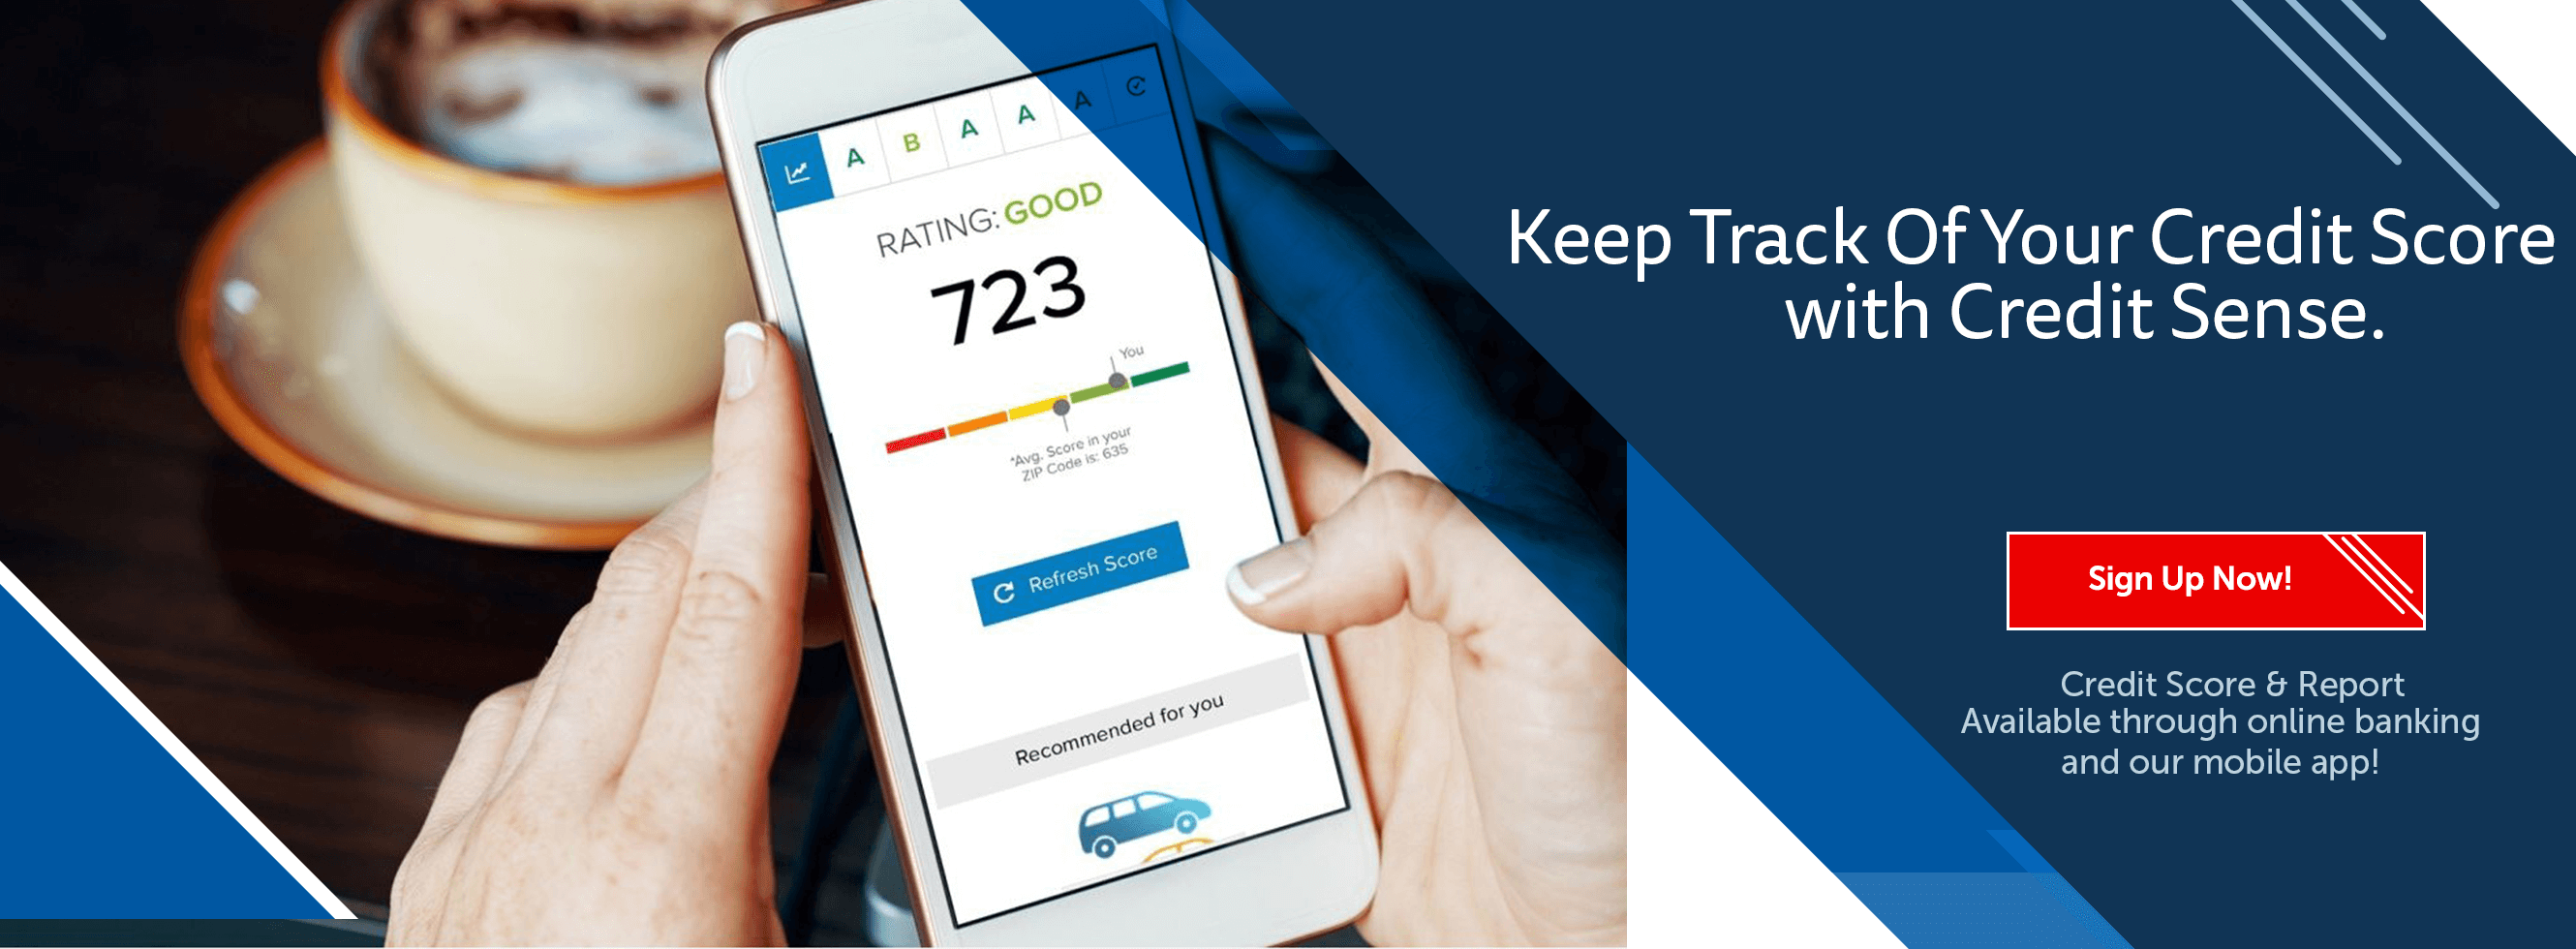 Keep Track Of Your Credit Score With Credit Sense.